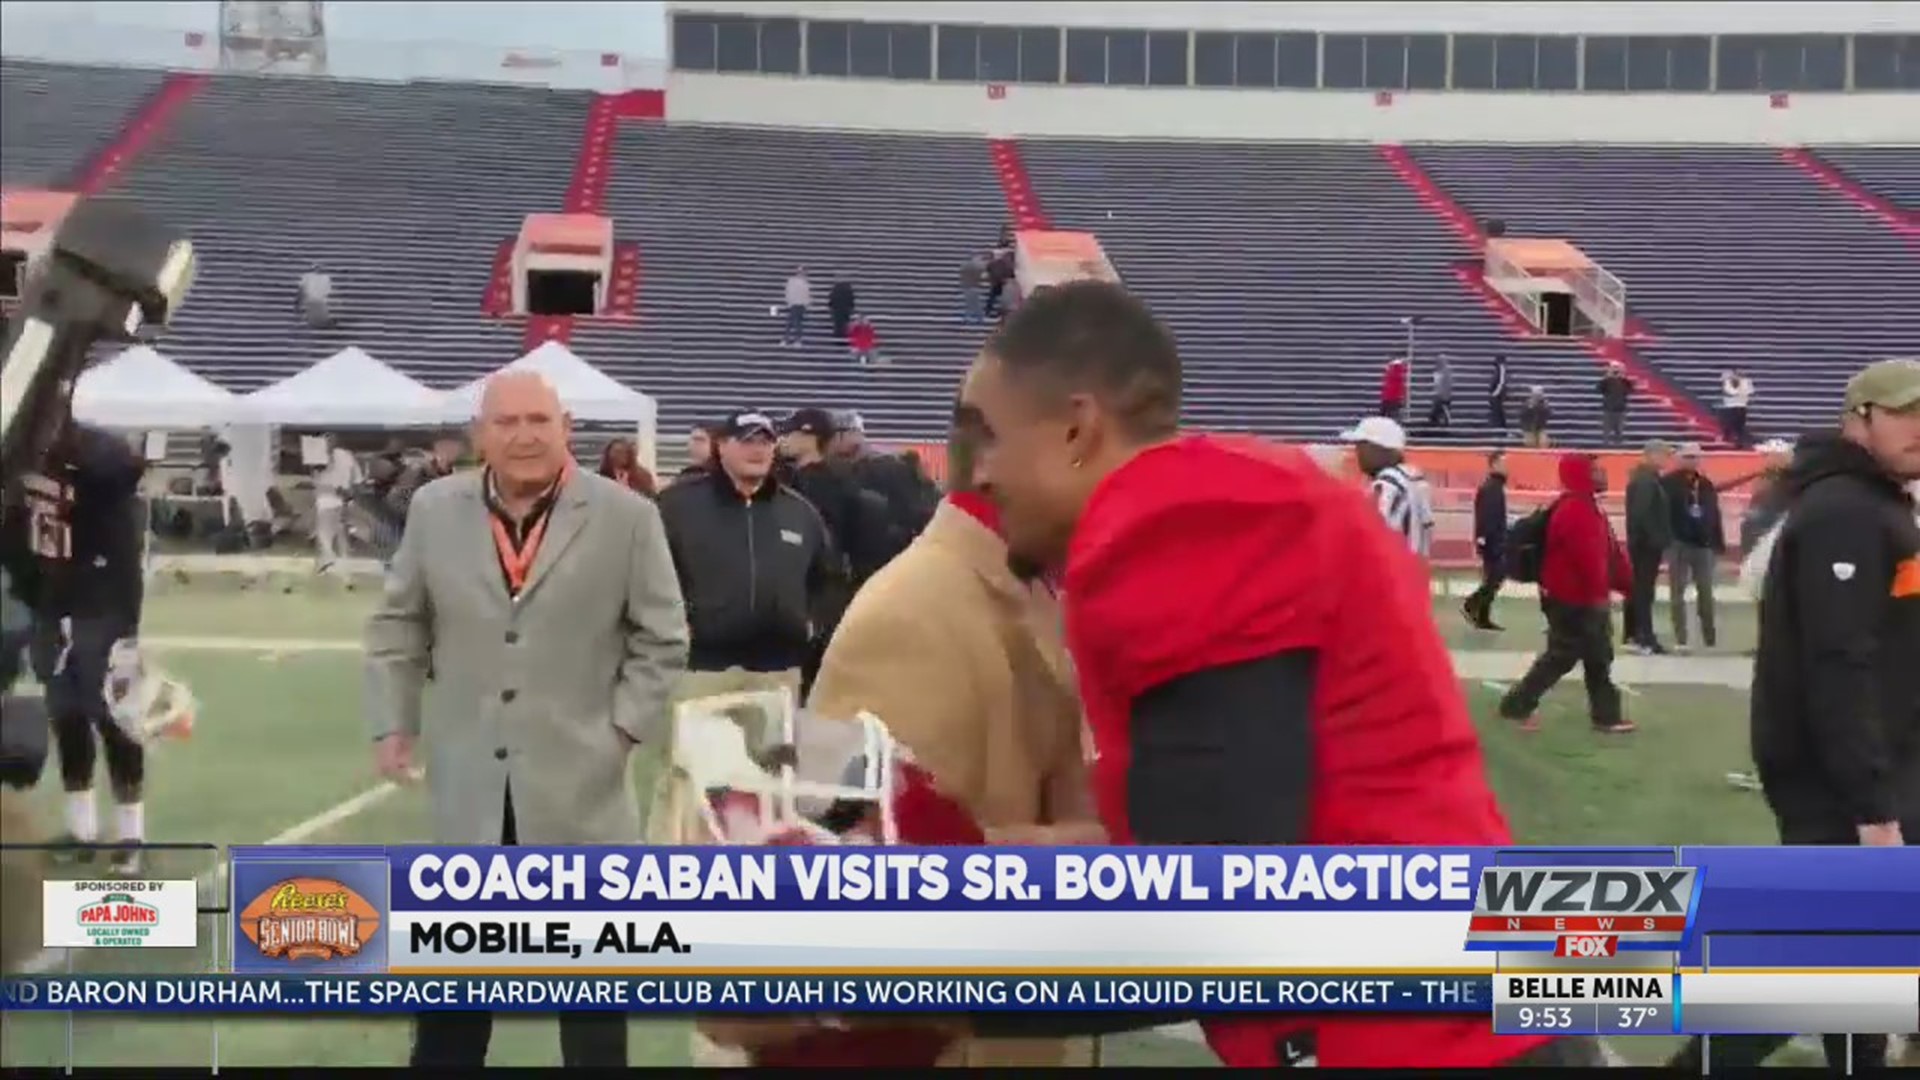 Fresh off of yet another solid season, Jalen Hurts struggled in his first Senior Bowl practice. However, his former coach isn’t worried about how that might affect his stock. Alabama head coach Nick Saban was asked how he would pitch Hurts to NFL teams.